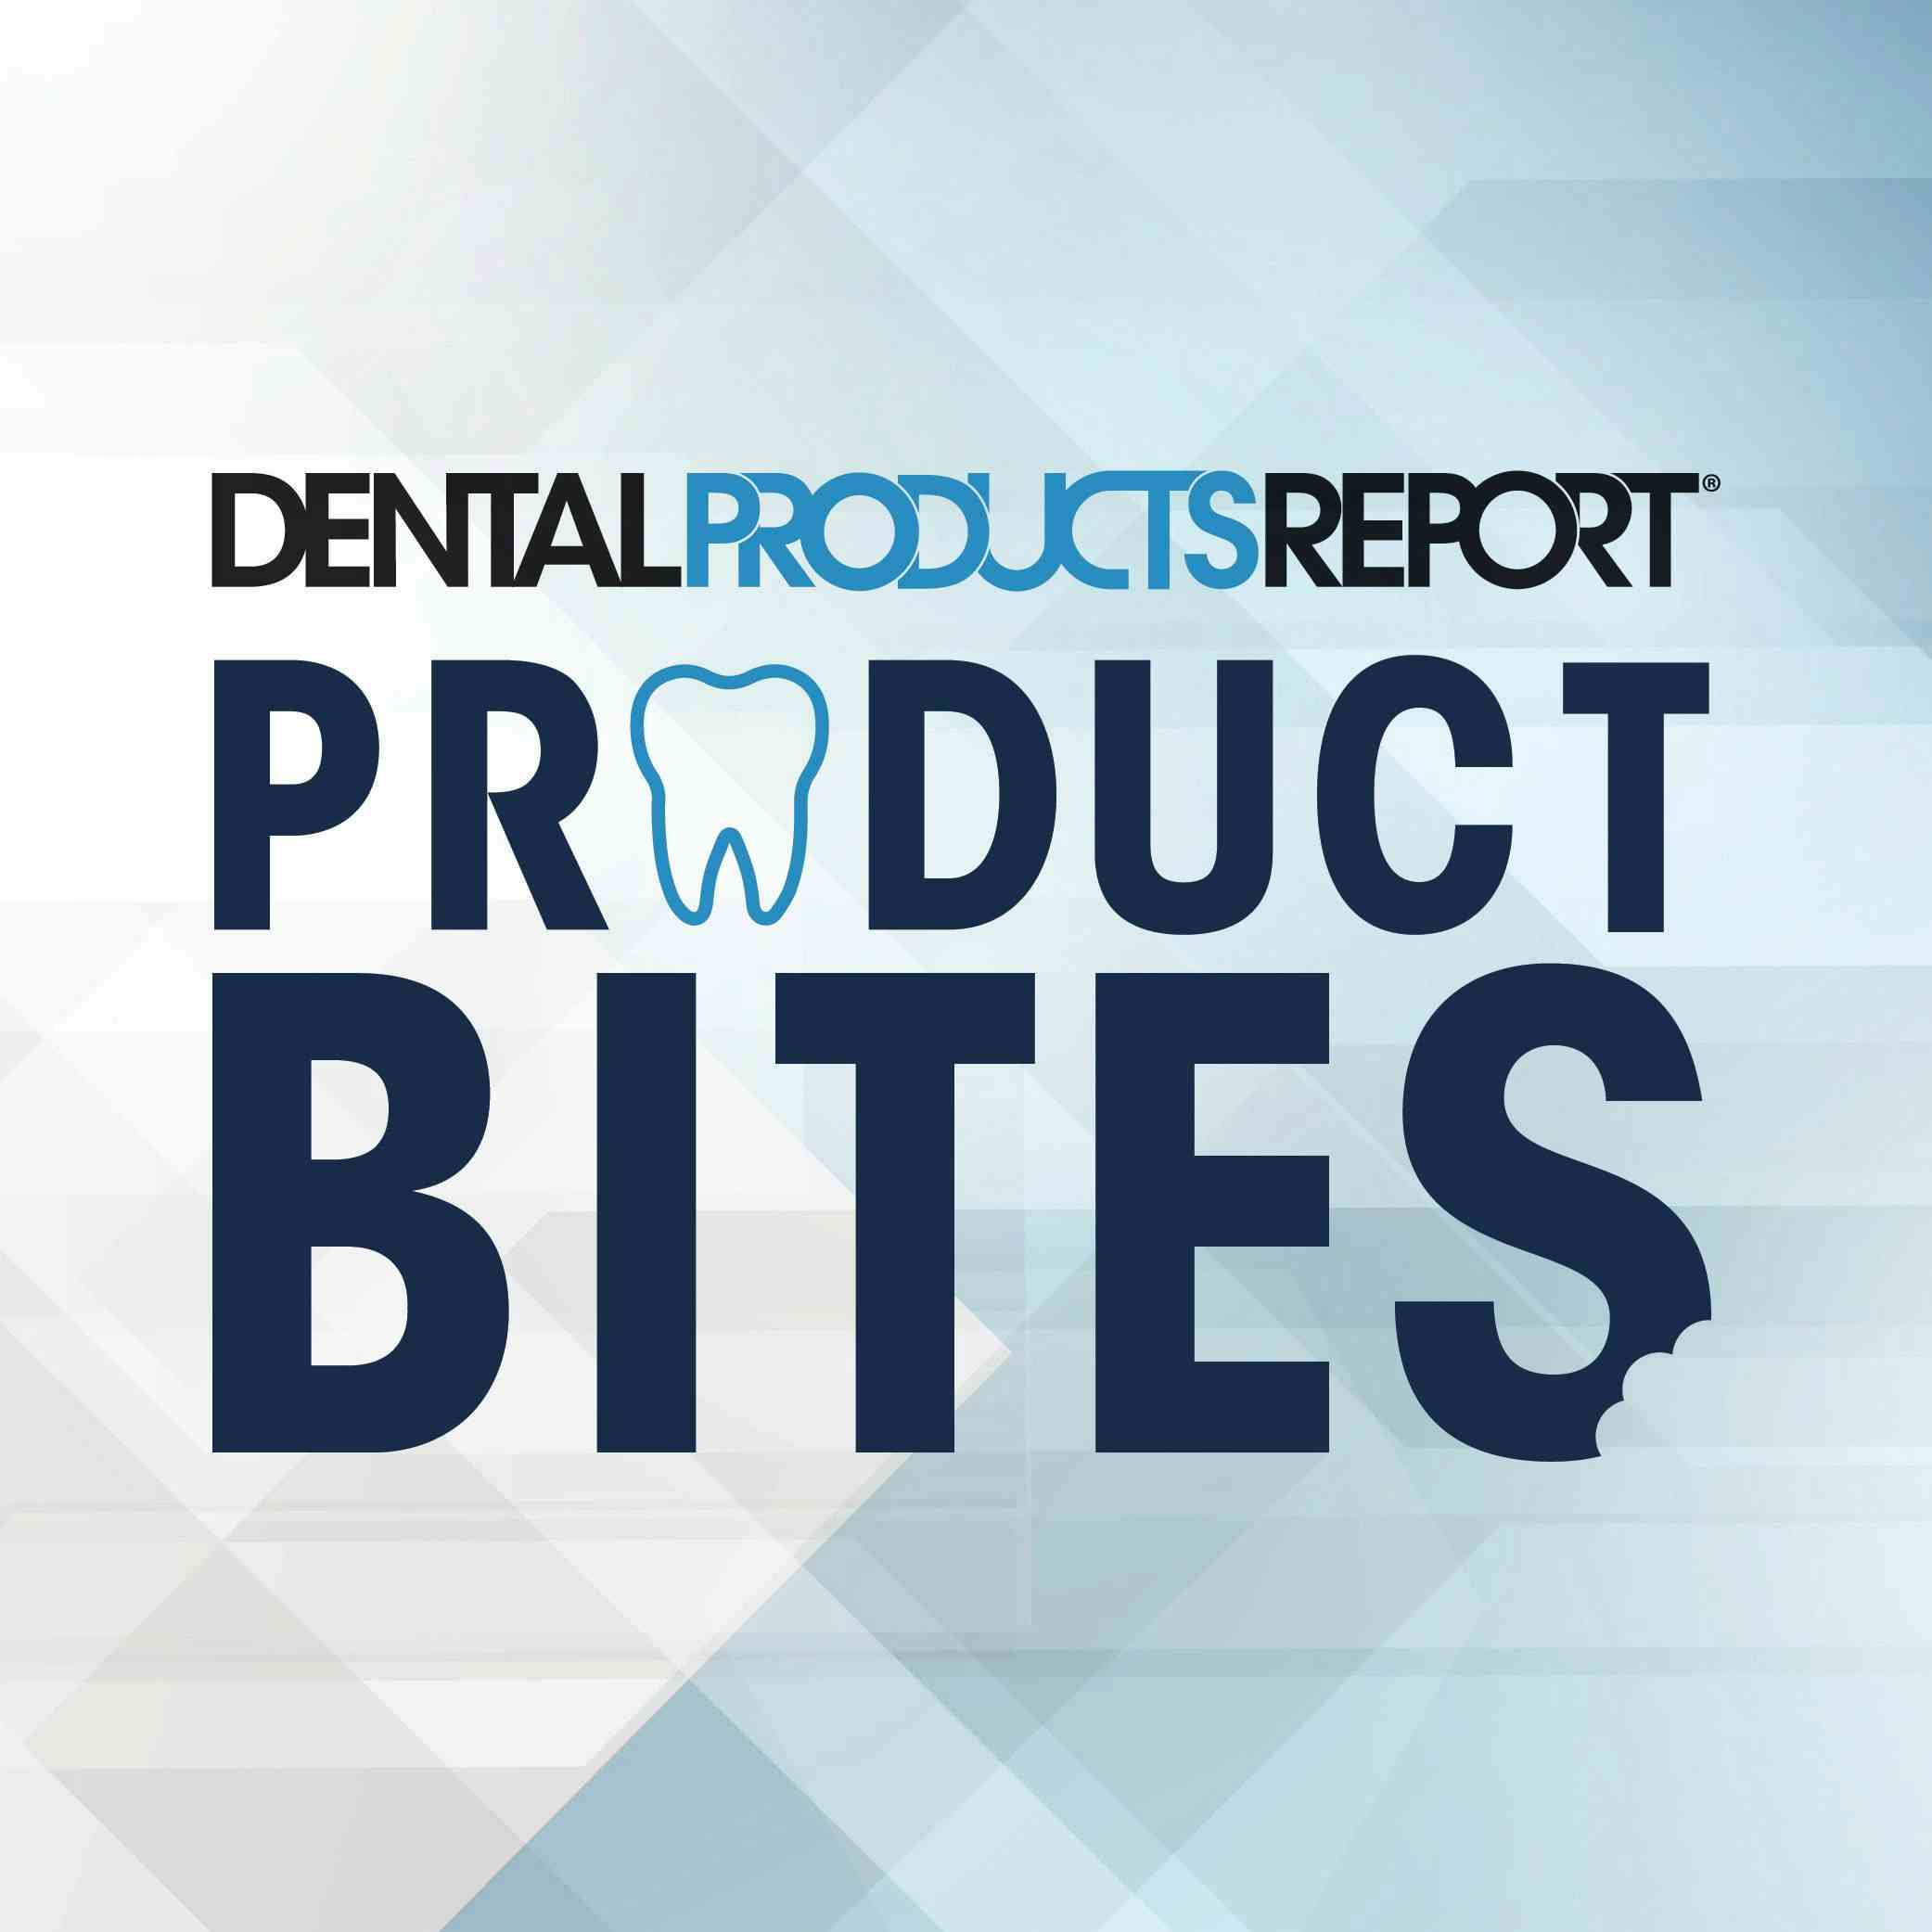 ProductBites from Dental Products Report